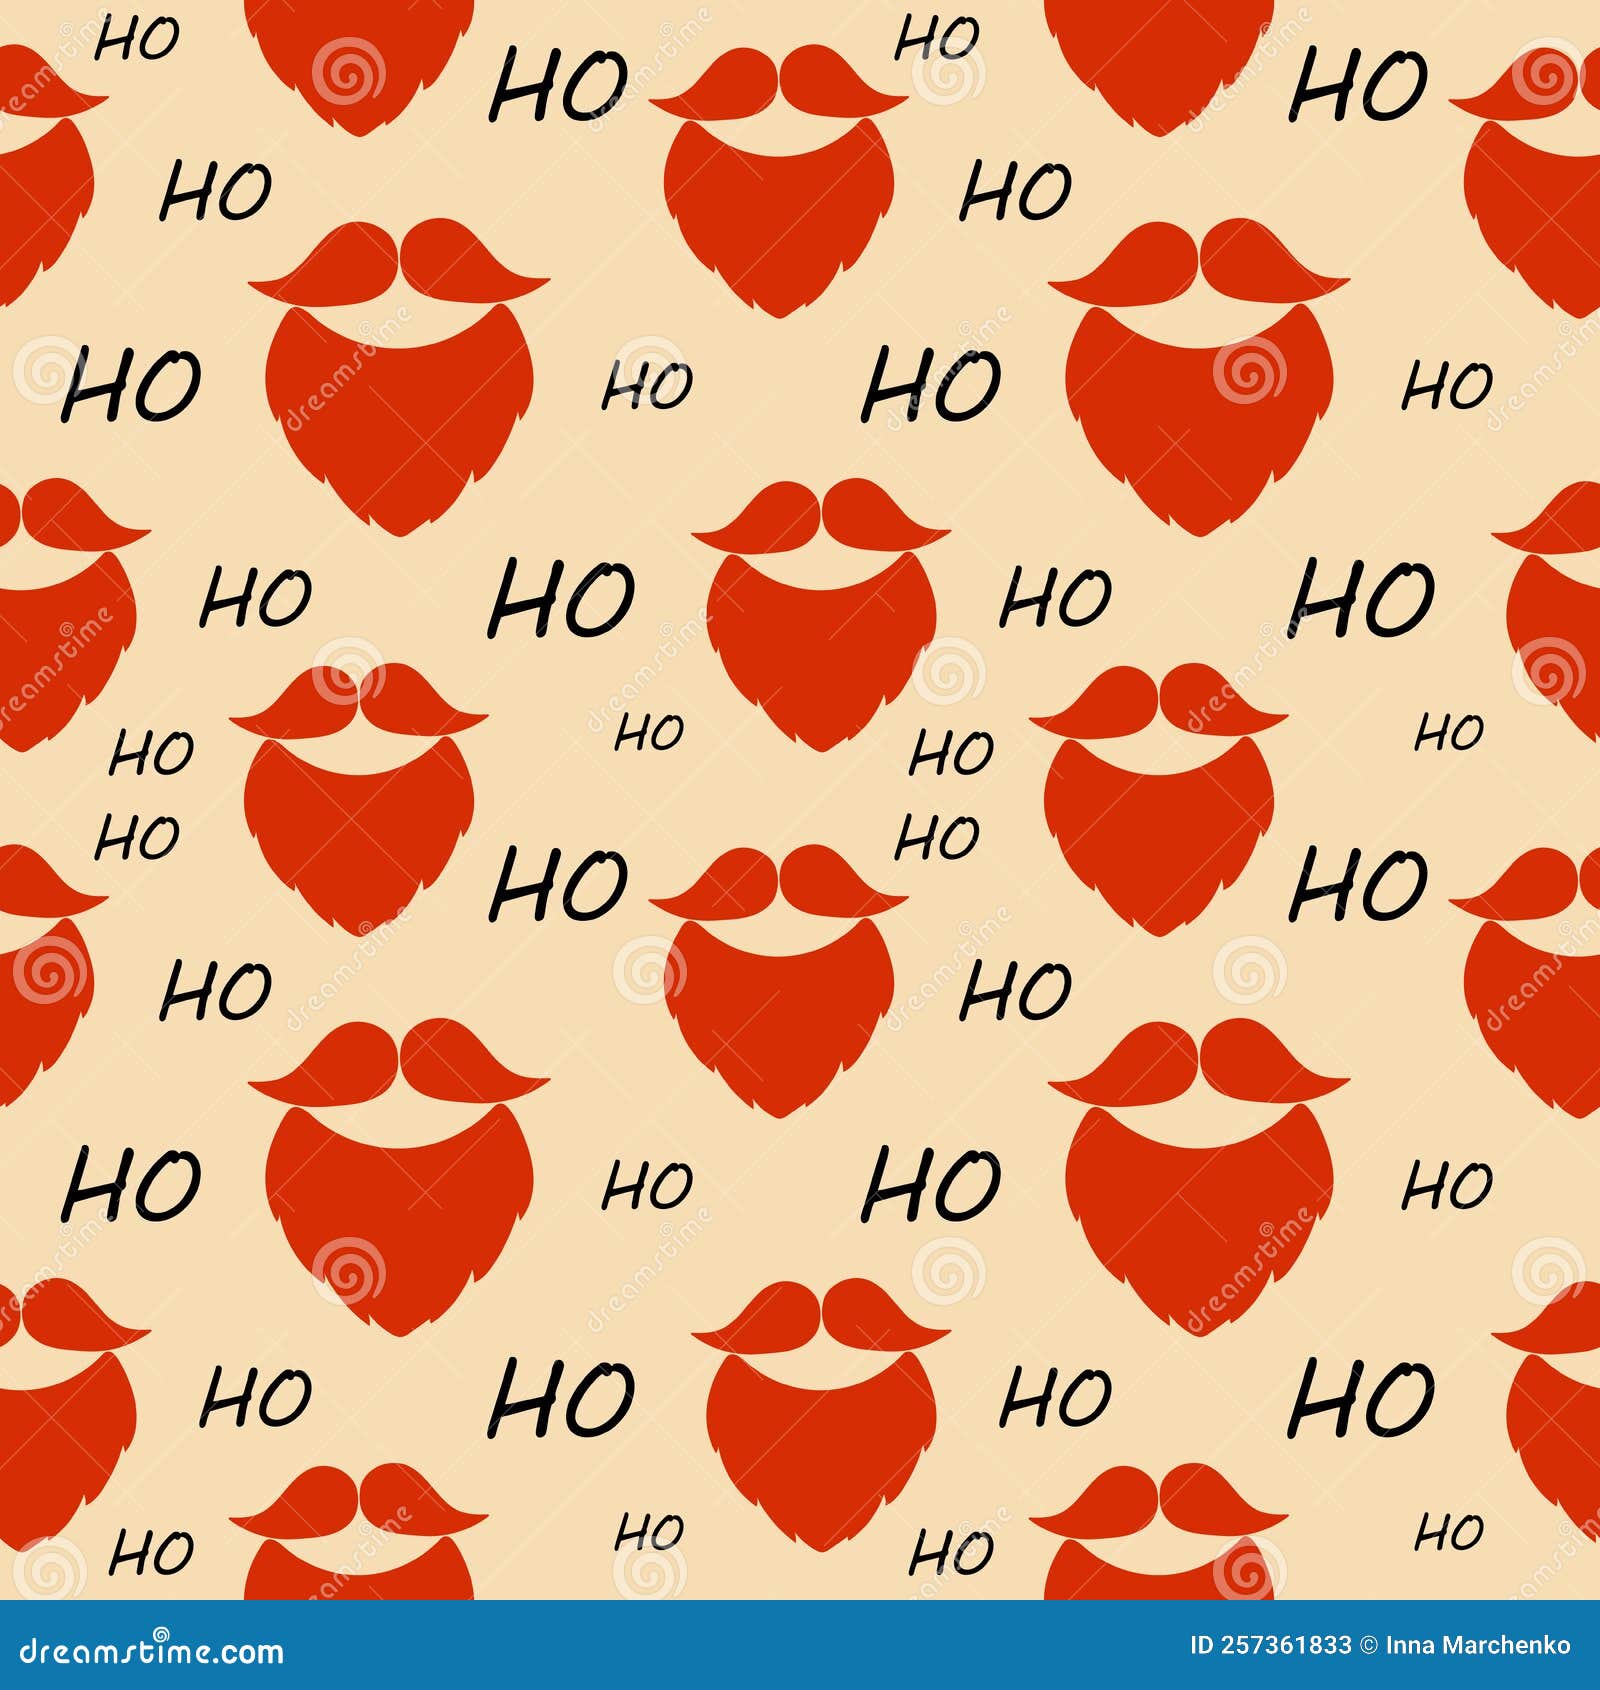 seamless-pattern-with-santa-s-beard-and-mustache-stock-vector